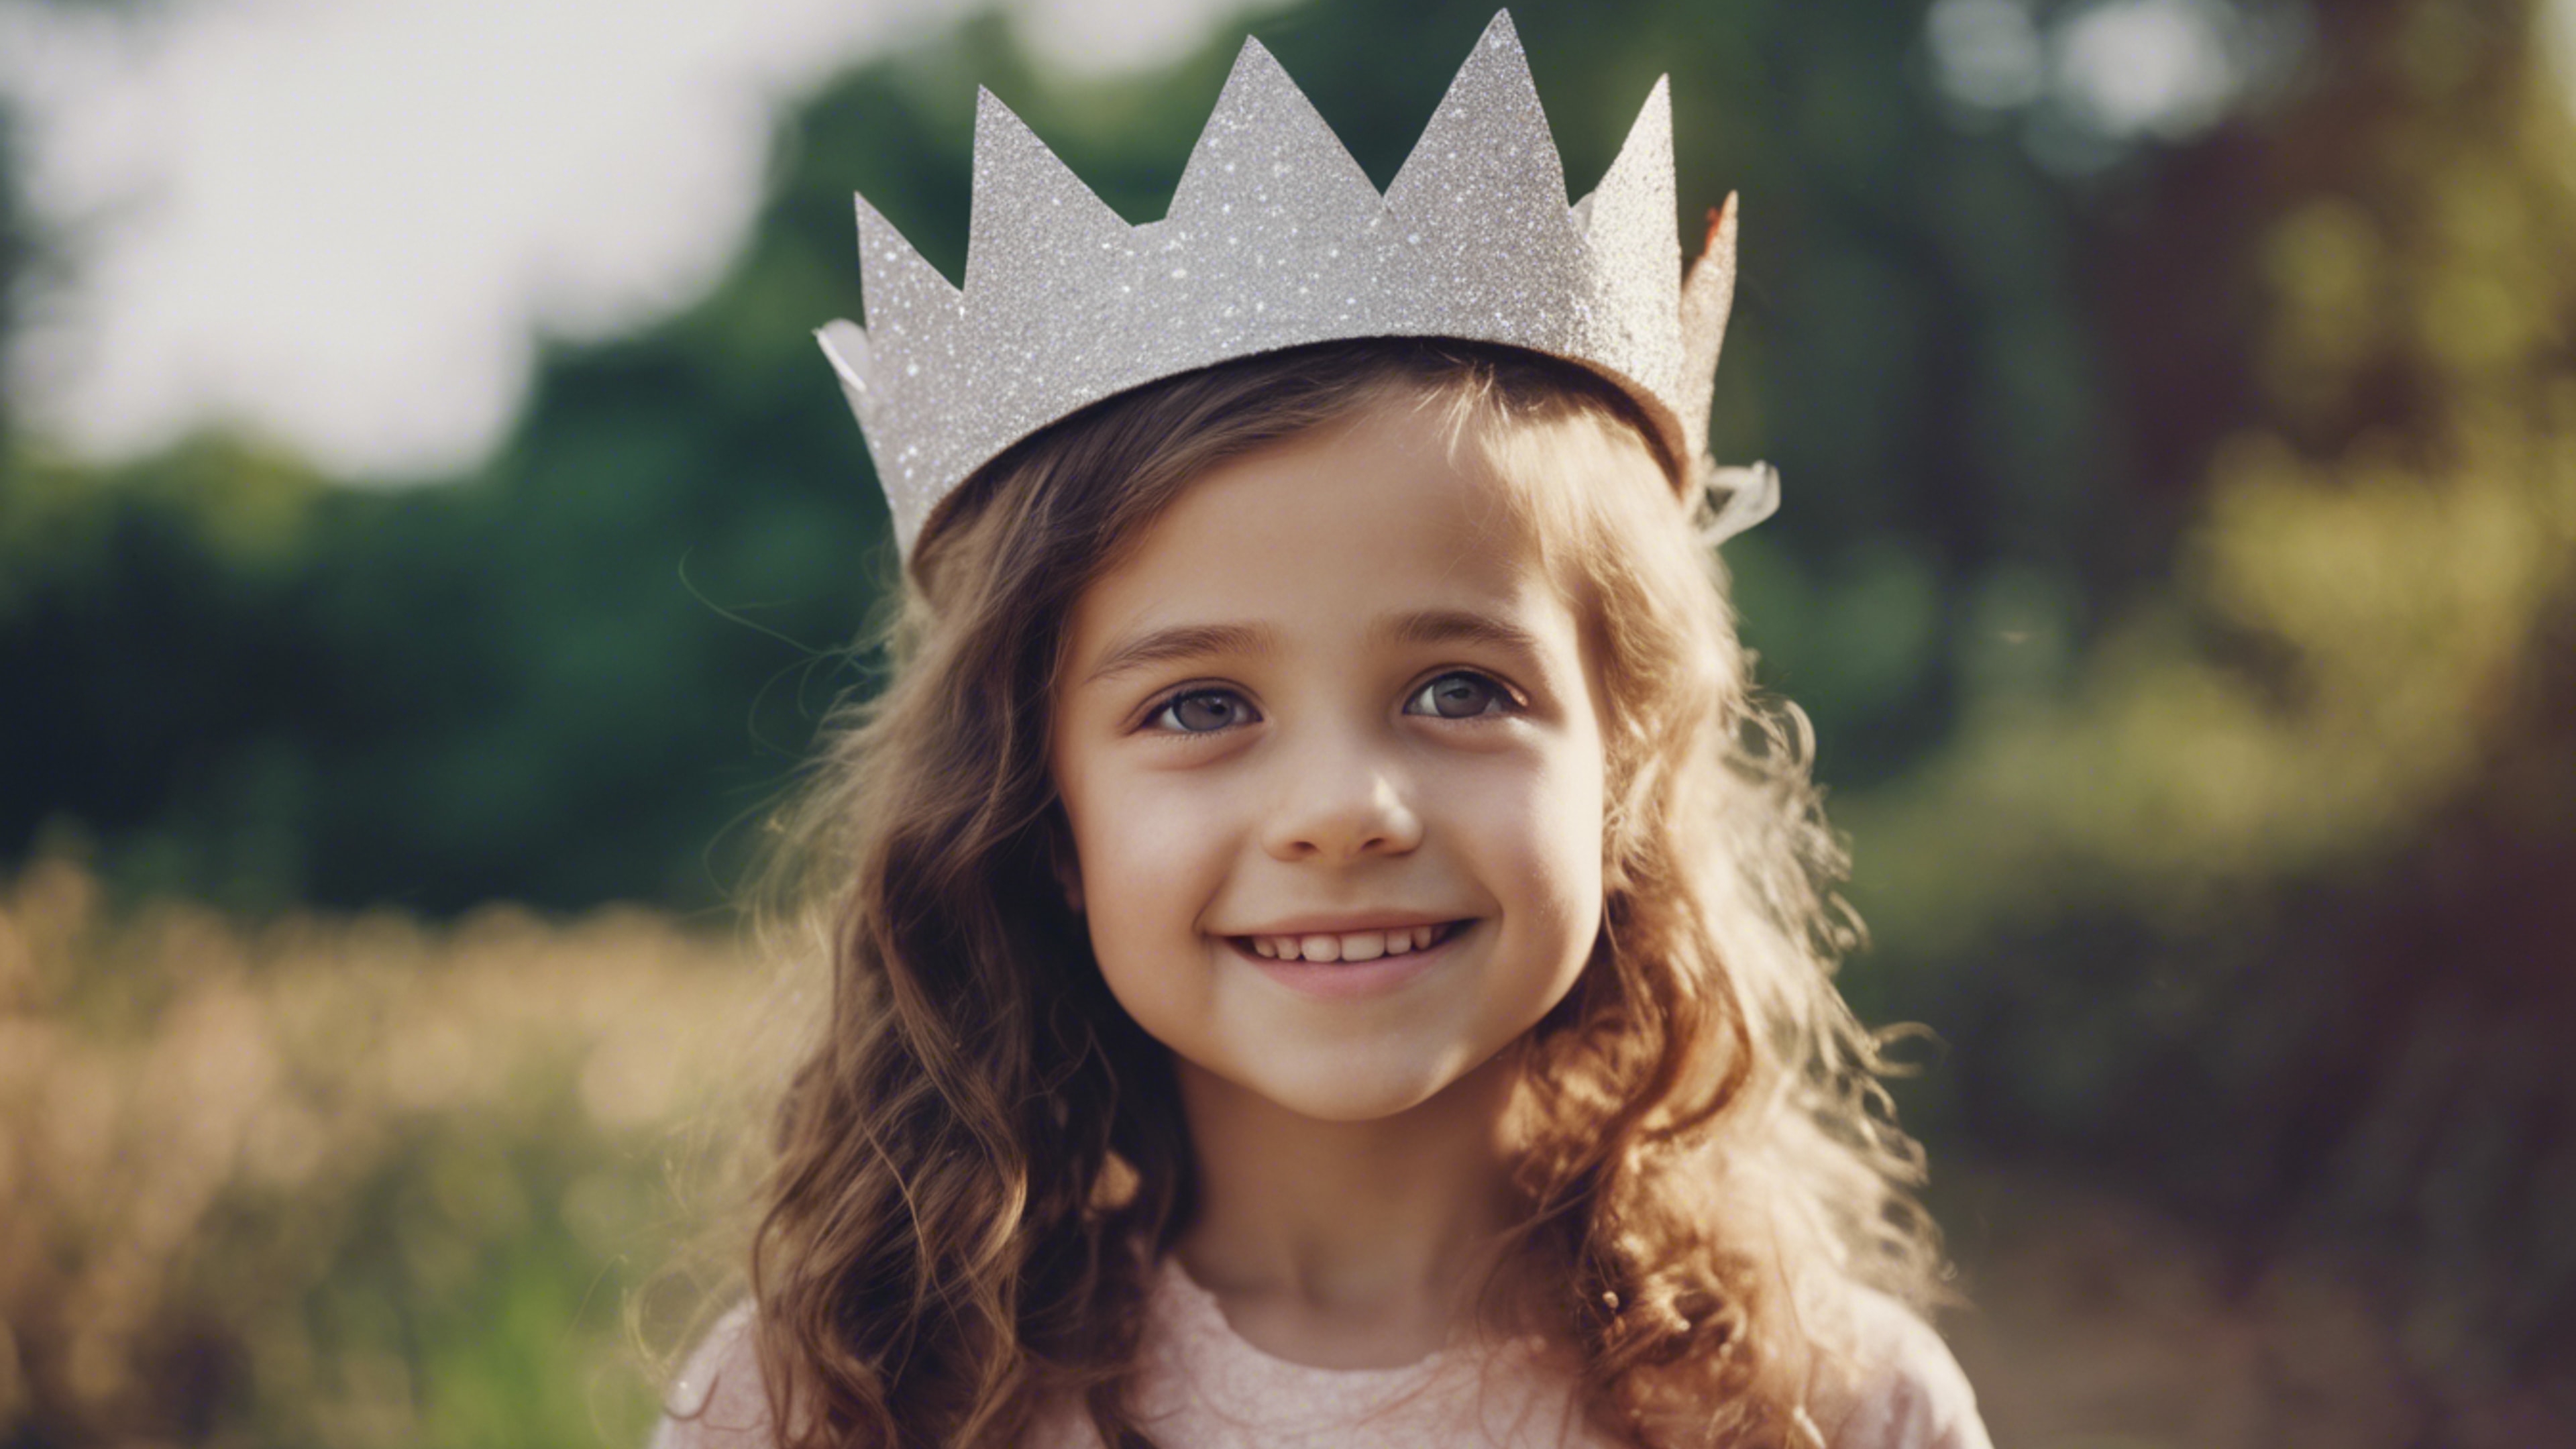 A young girl with sparkling eyes, happily wearing a homemade paper crown. Wallpaper[aa9d8265bf9b488b9728]